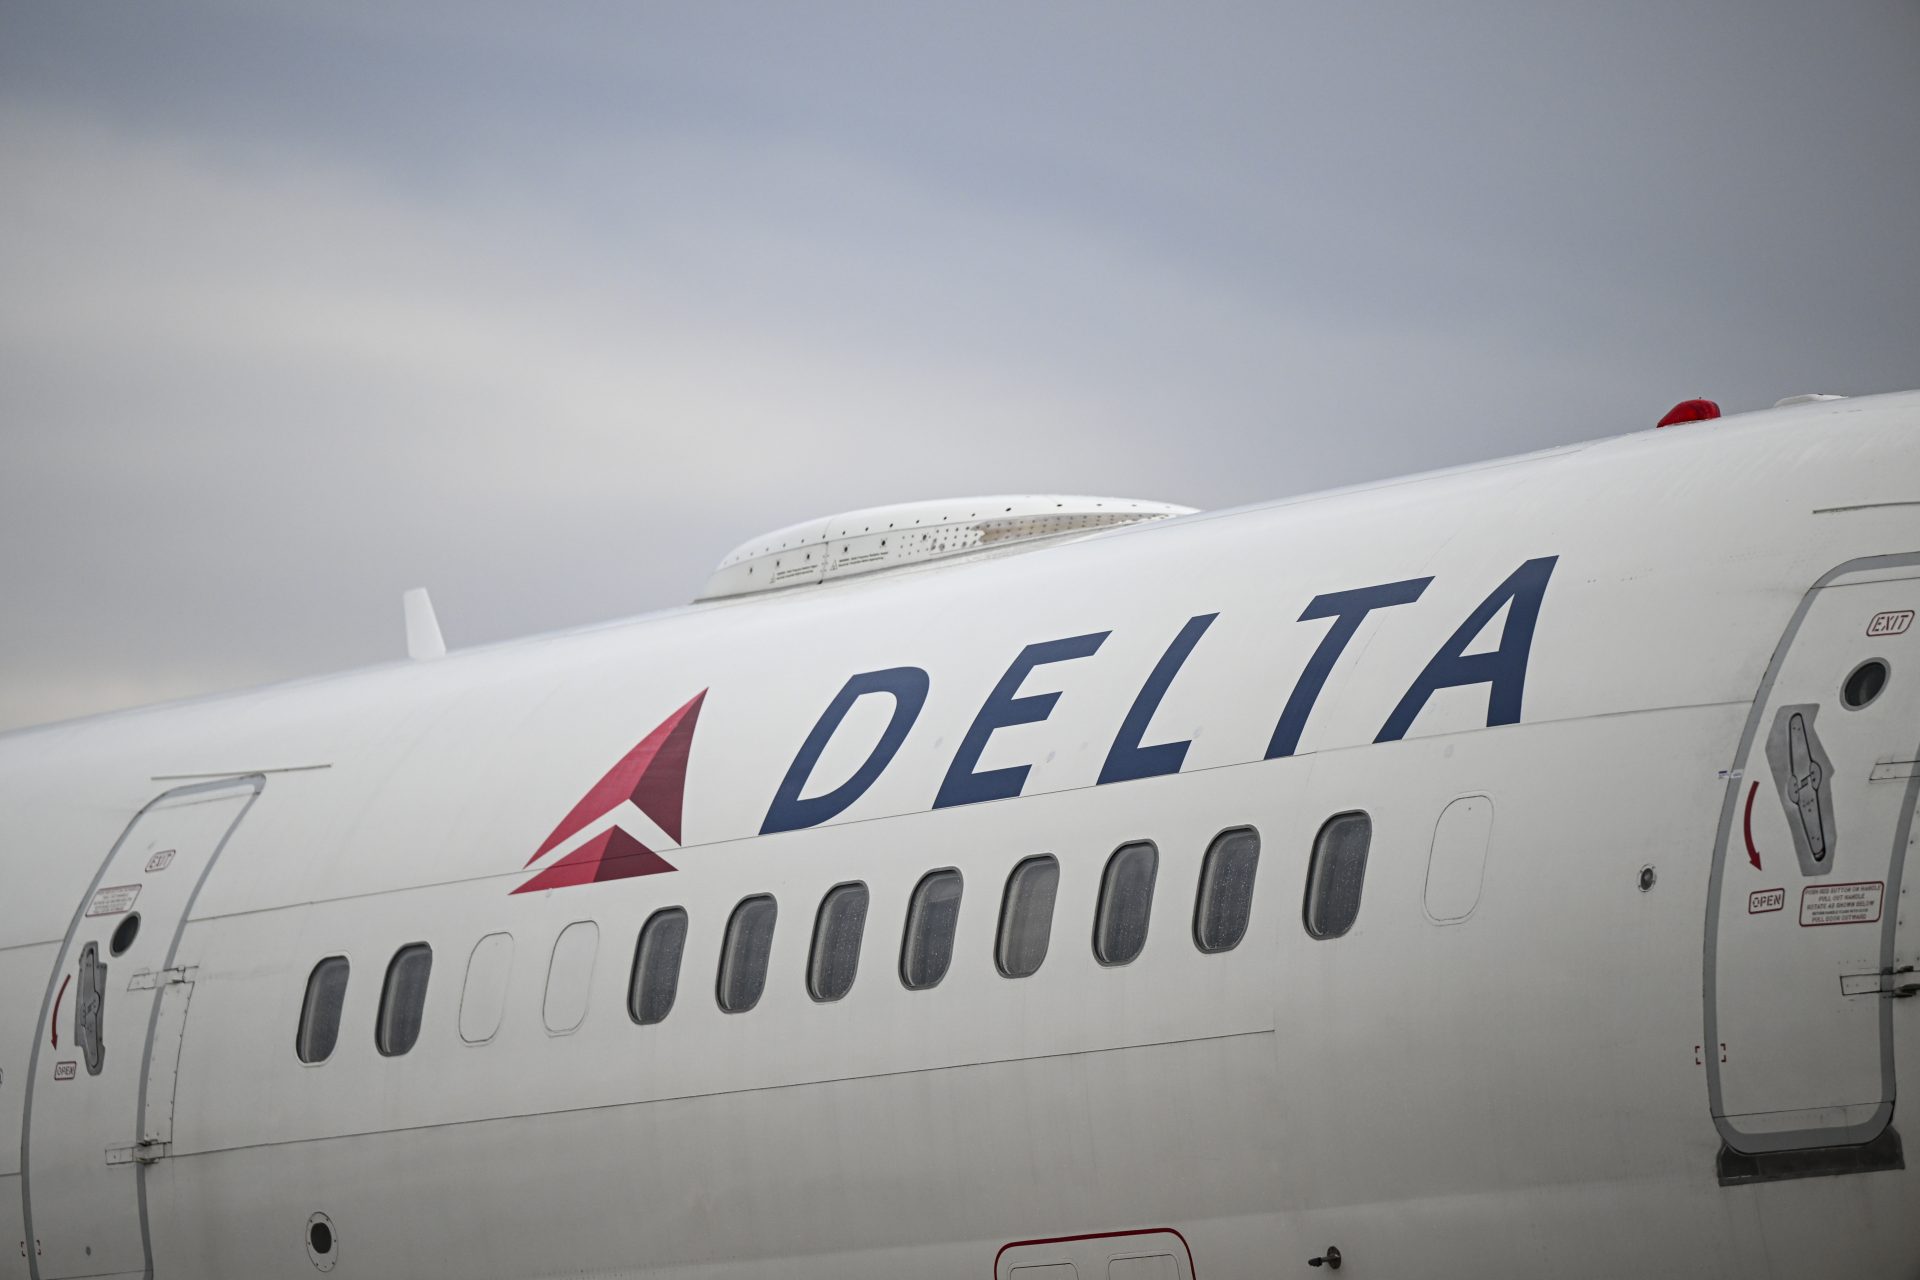 <p><span>Delta came in first with the highest final score in relation to any of its competitors at 66.76. The airline had the lowest number of cancellations, delays, denied boardings, and mishandled baggage reports.</span></p>